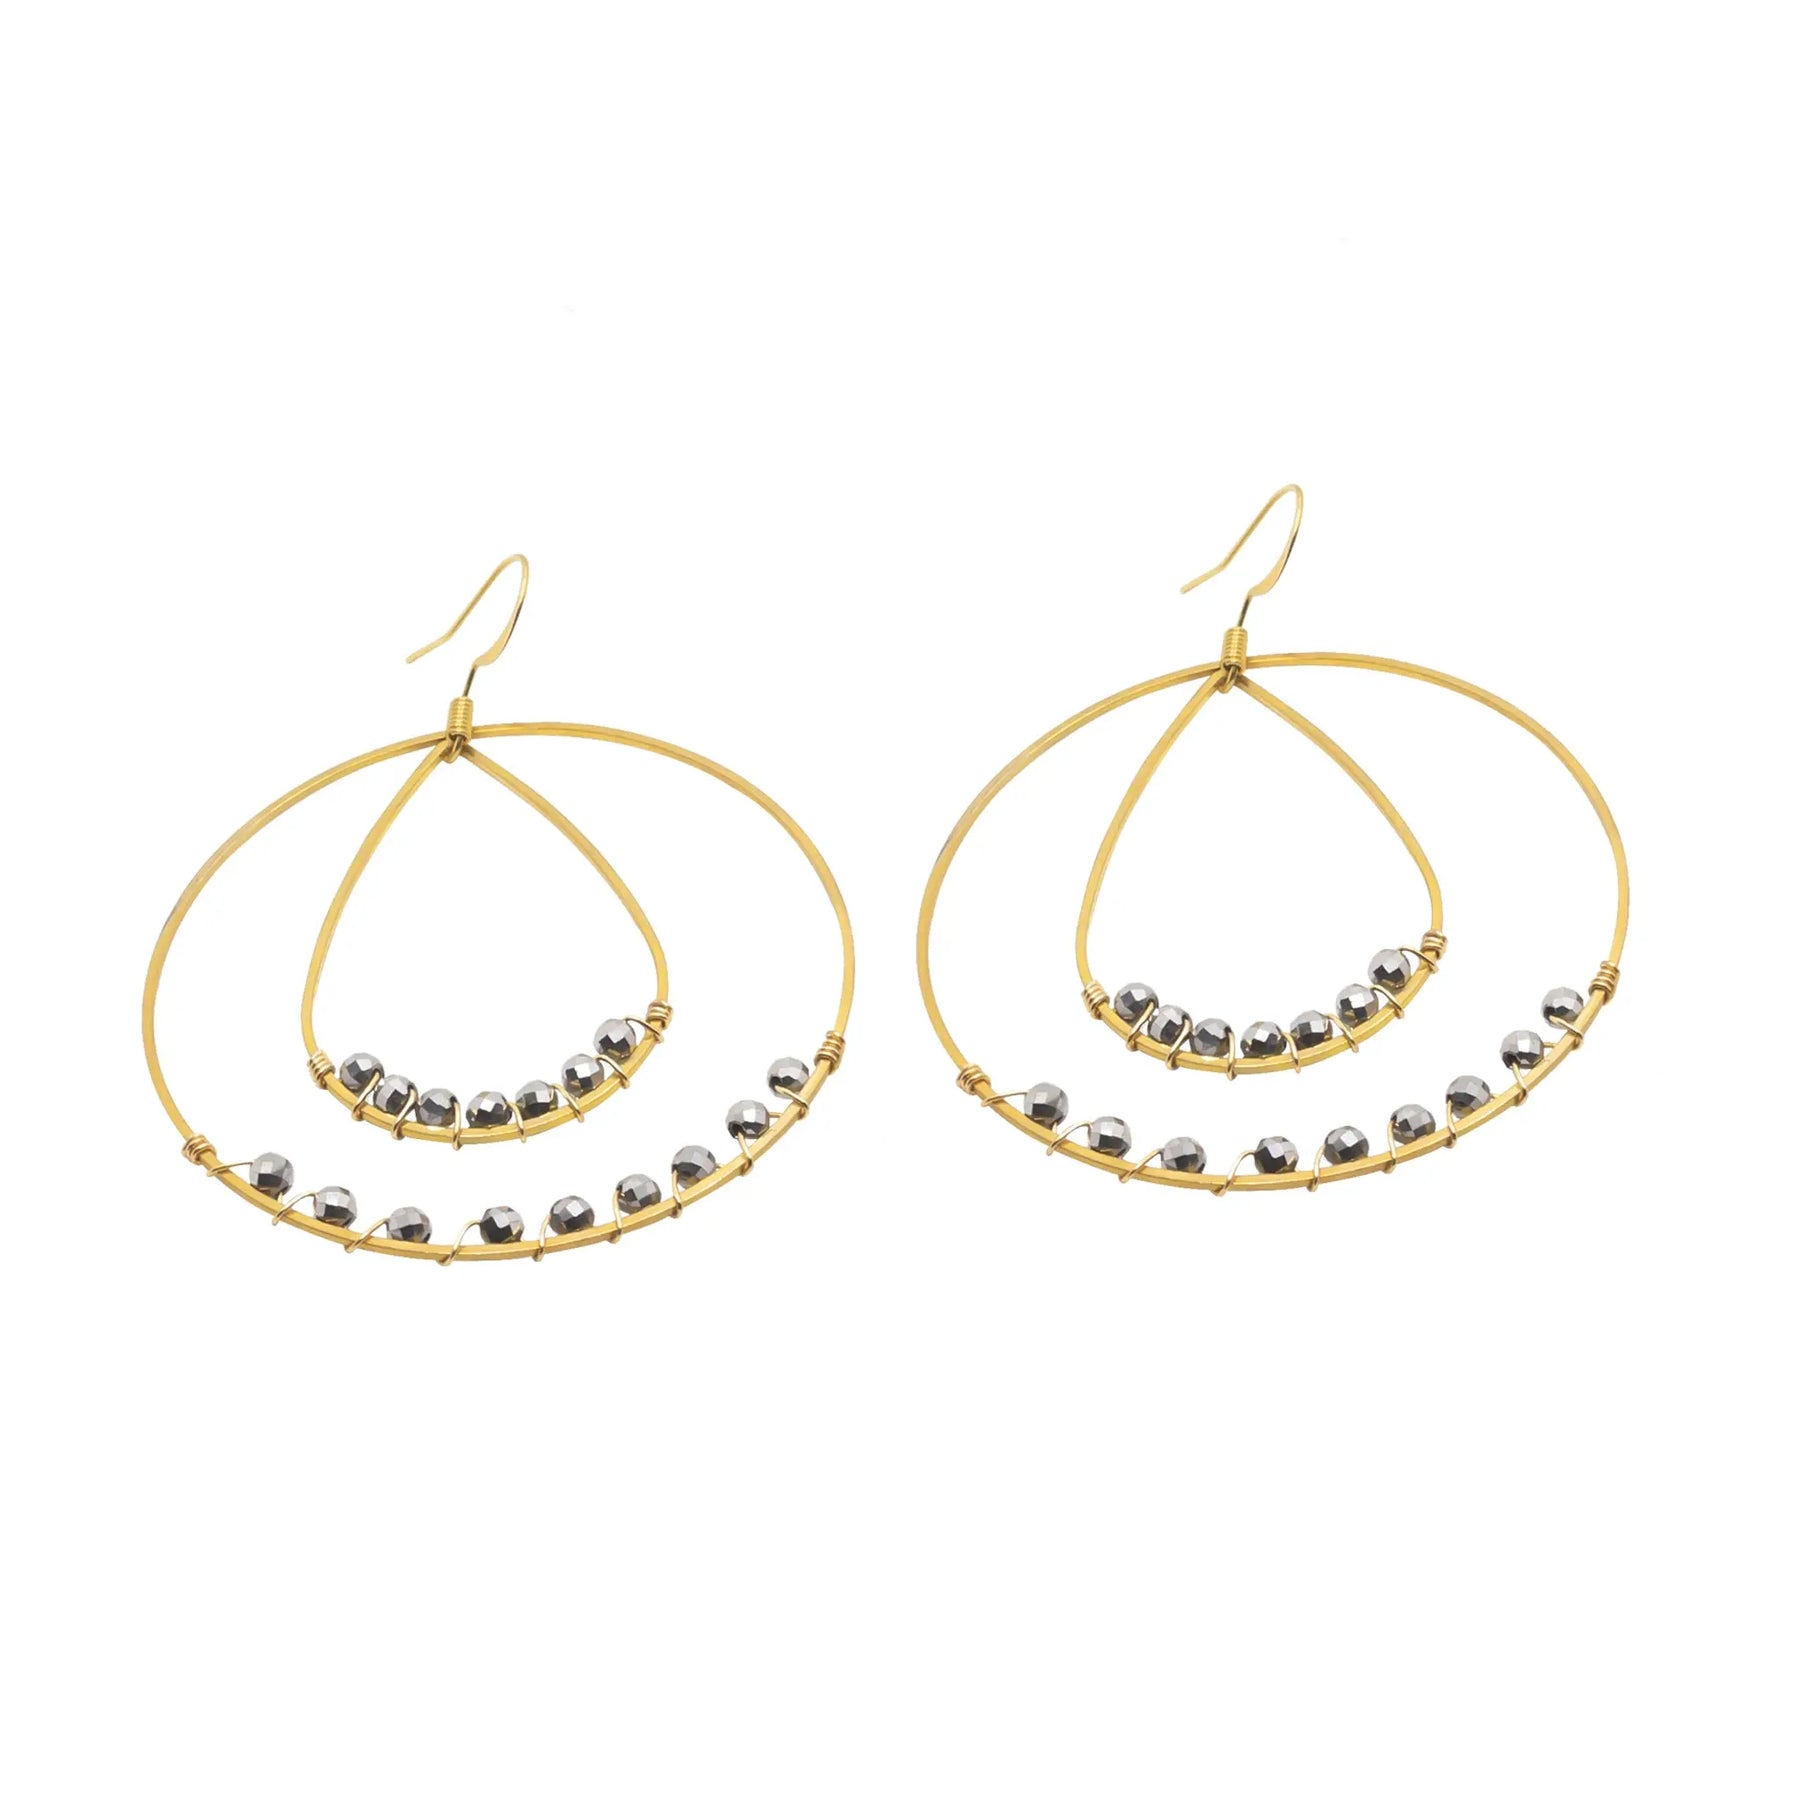 A pair of large circle earrings with beaded accents.